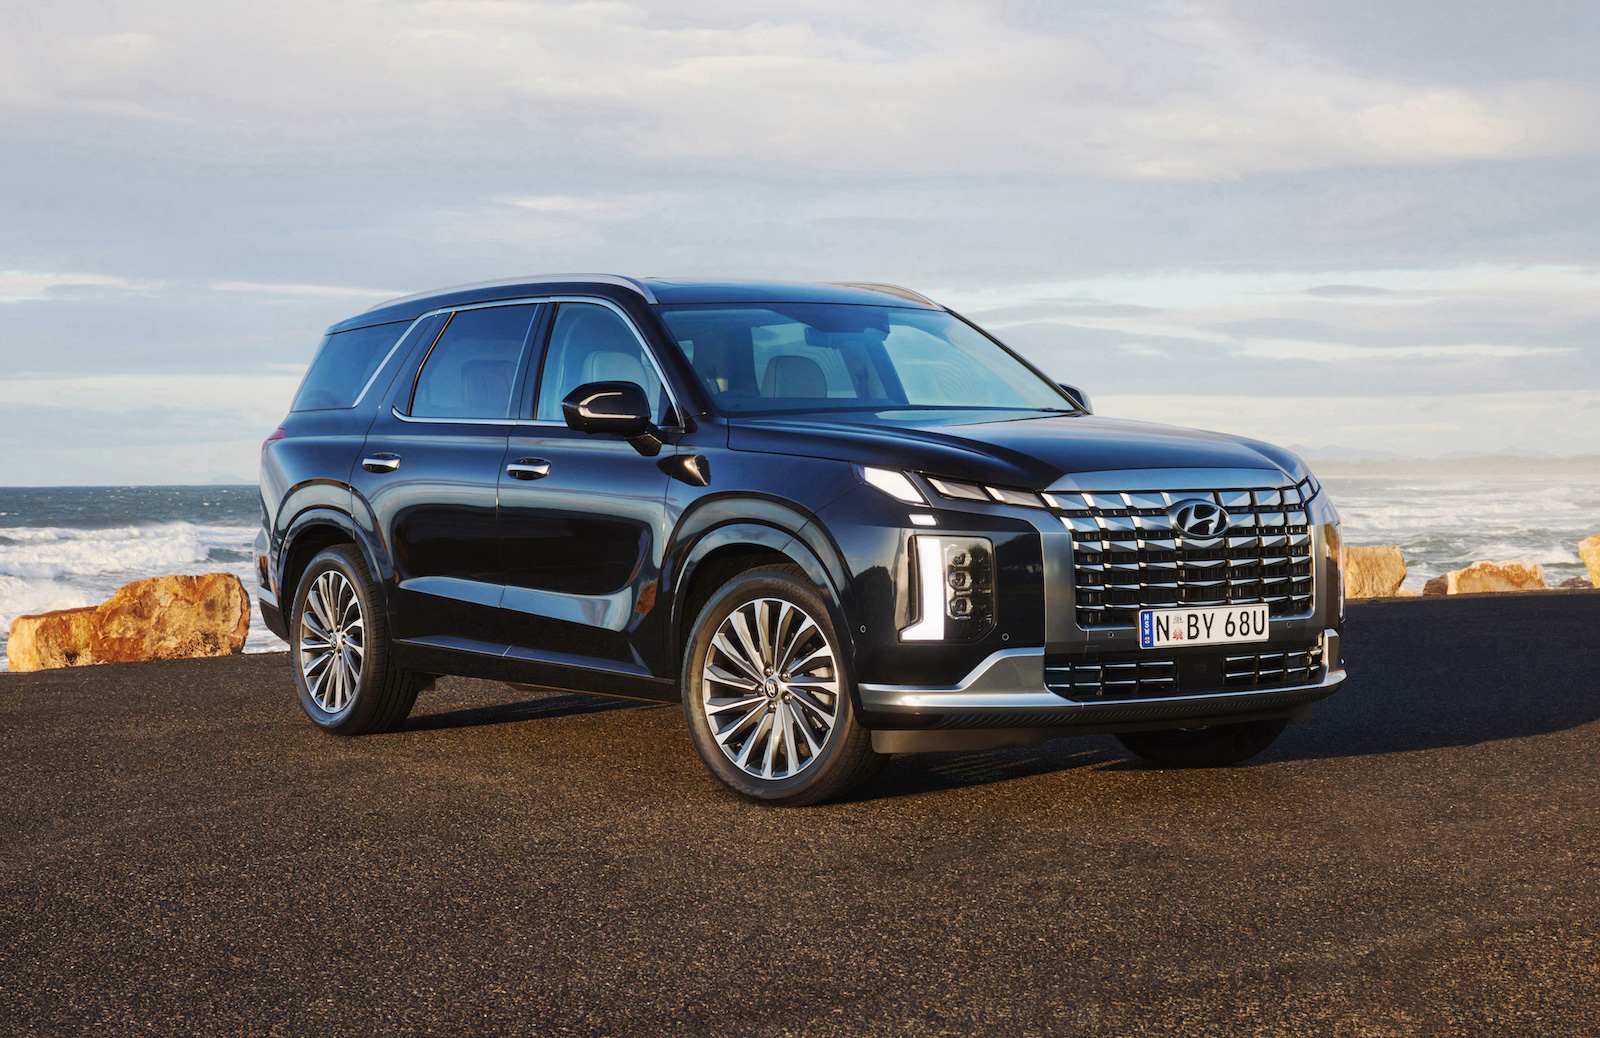 2023 Hyundai Palisade on sale in Australia from $65,900